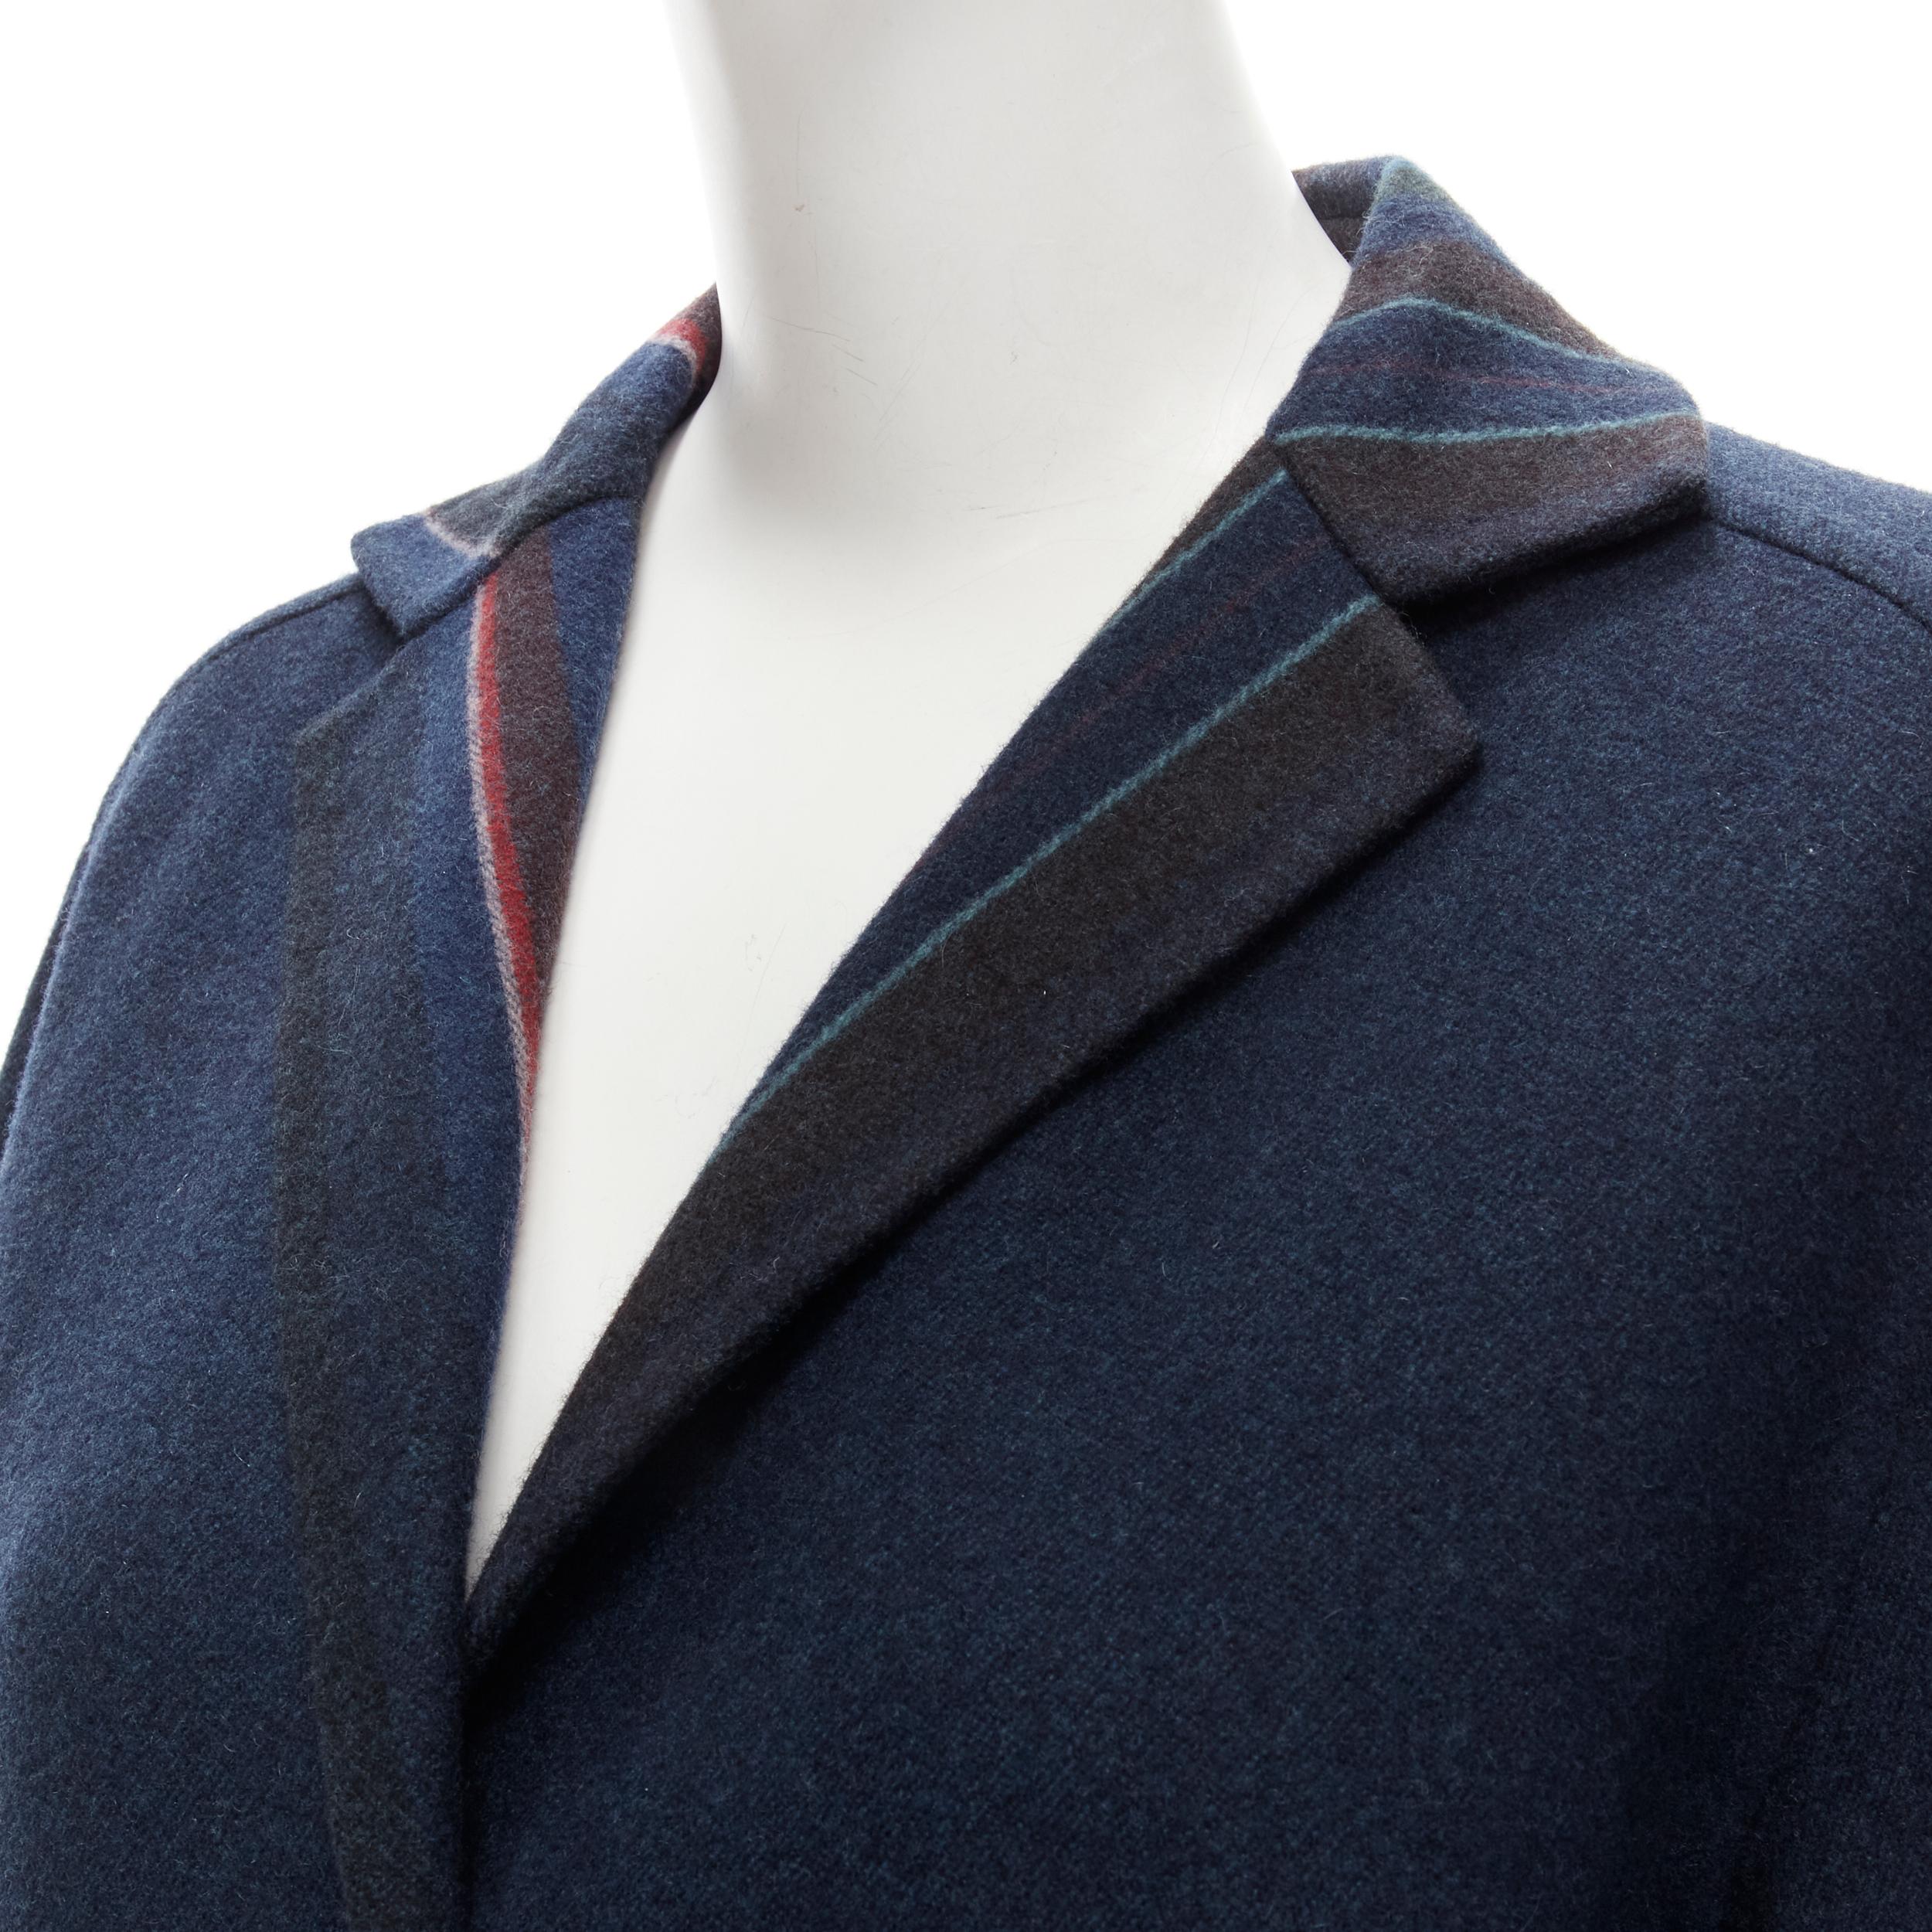 HERMES navy double faced virgin wool cashmere stripe lining maxi coat FR34 XS
Brand: Hermes
Material: Wool
Color: Navy
Pattern: Solid
Closure: Button
Extra Detail: Silver-tone and black enamel Sellier logo buttons. Double faced wool-cashmere blend.